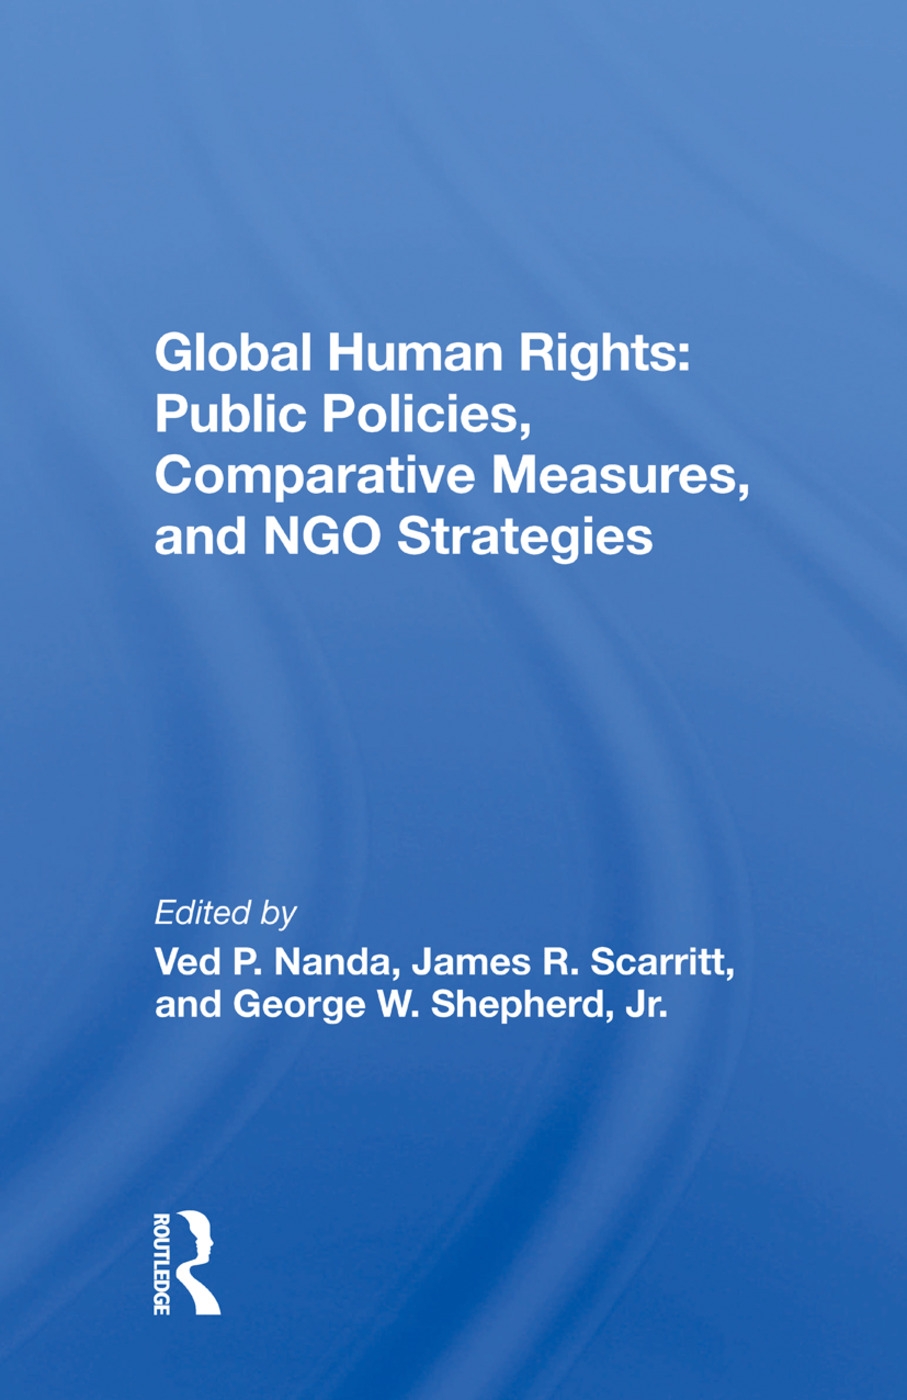 Global Human Rights: Public Policies, Comparative Measures, and Ngo Strategies